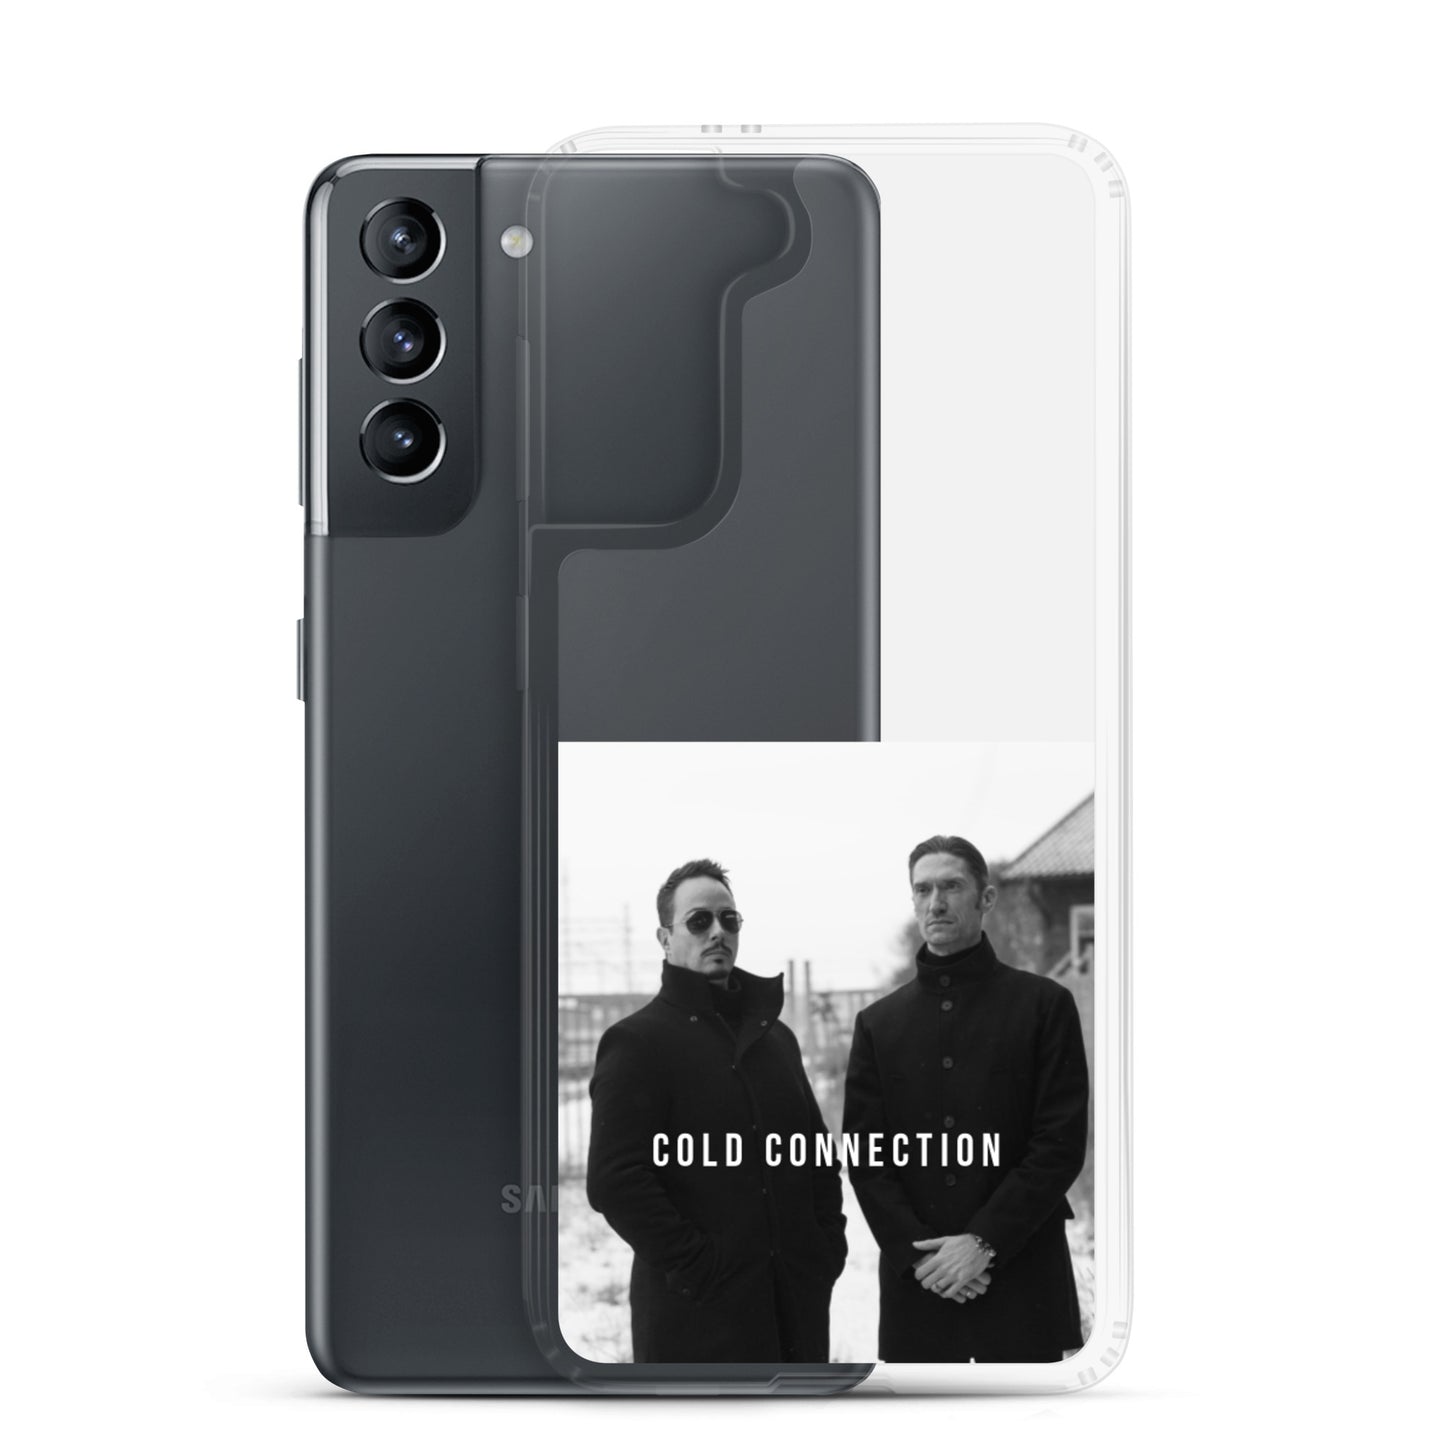 Cold Connection, official band photo, Samsung Case